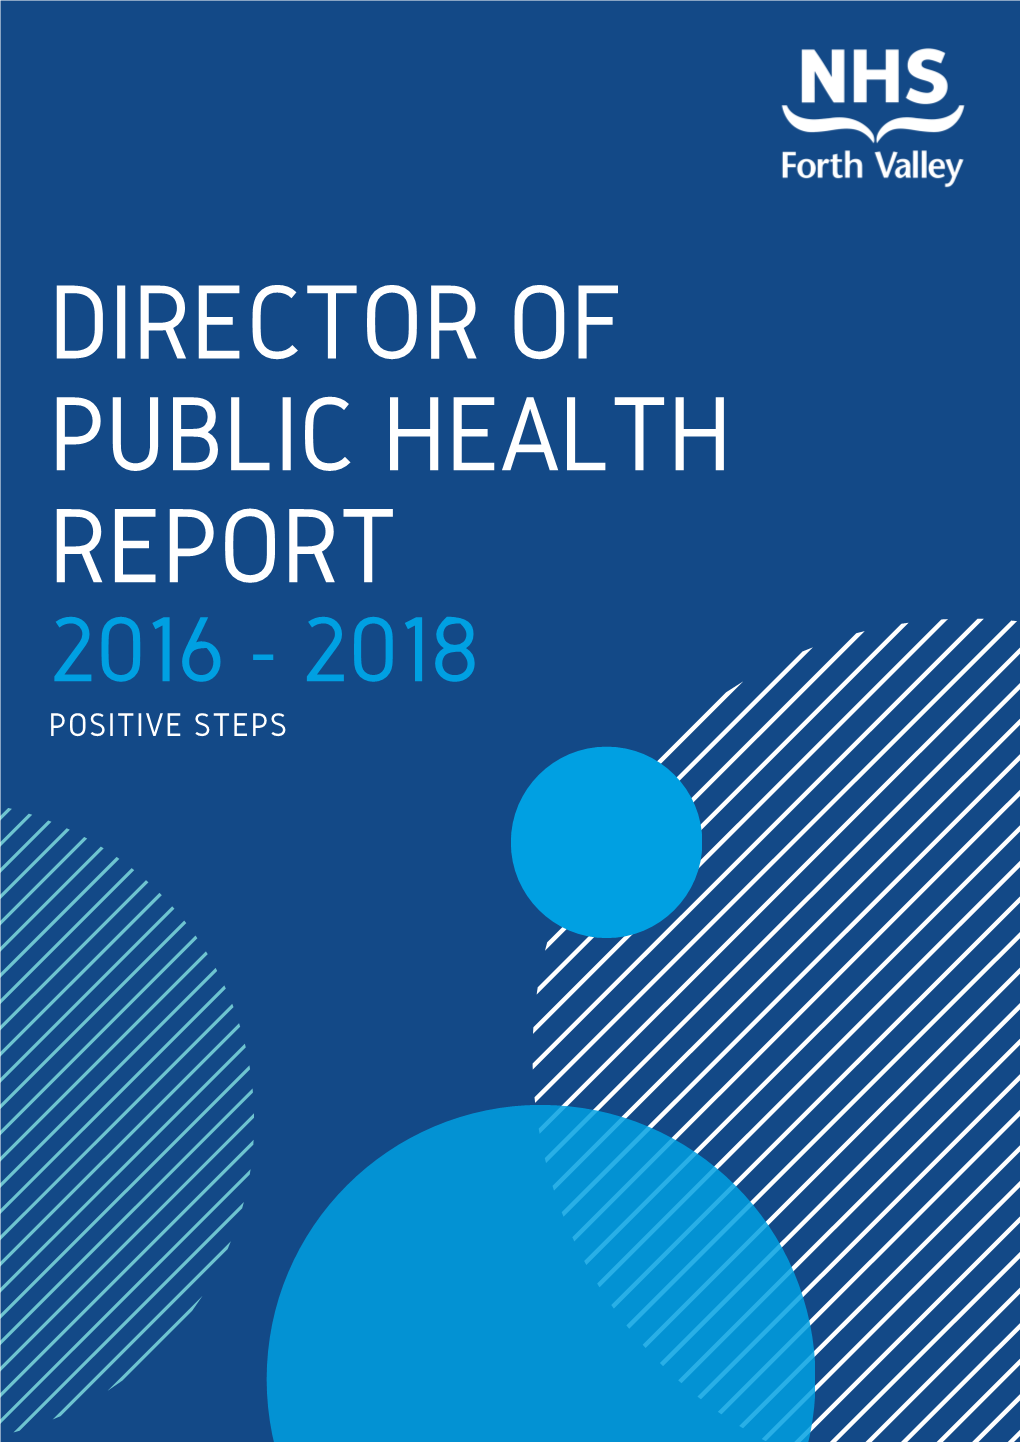 Director of Public Health Report 2016 - 2018 Positive Steps